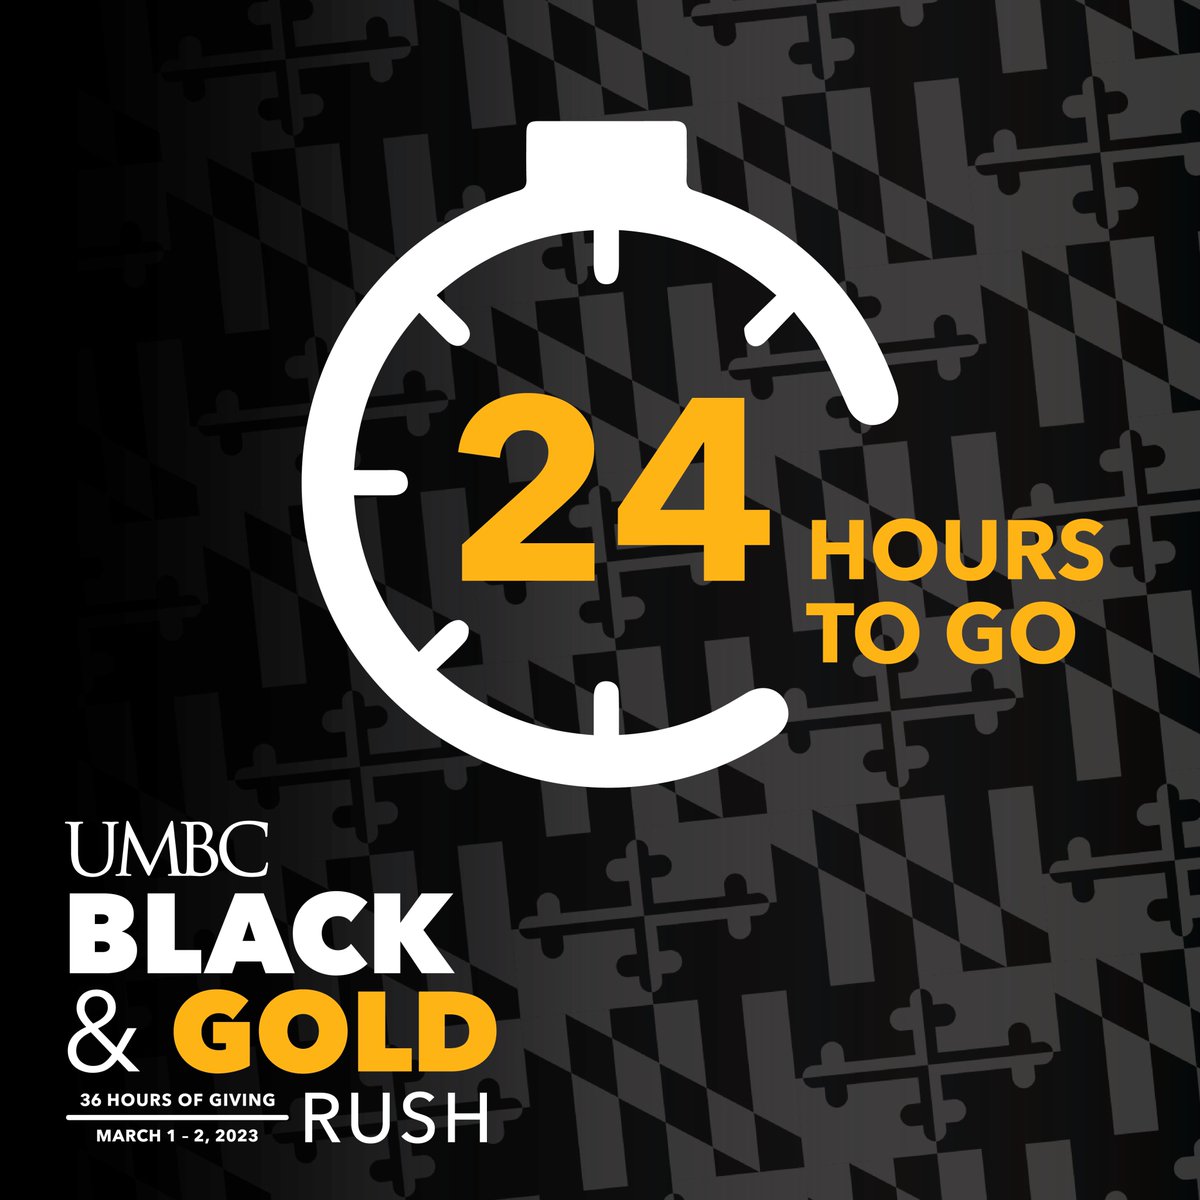 Most of my followers here are Union friends, but if there are any UMBC people seeing this or anyone feeling generous, I'd love to end Day 1 of Black & Gold Rush with 1000 donors! blackandgoldrush.umbc.edu